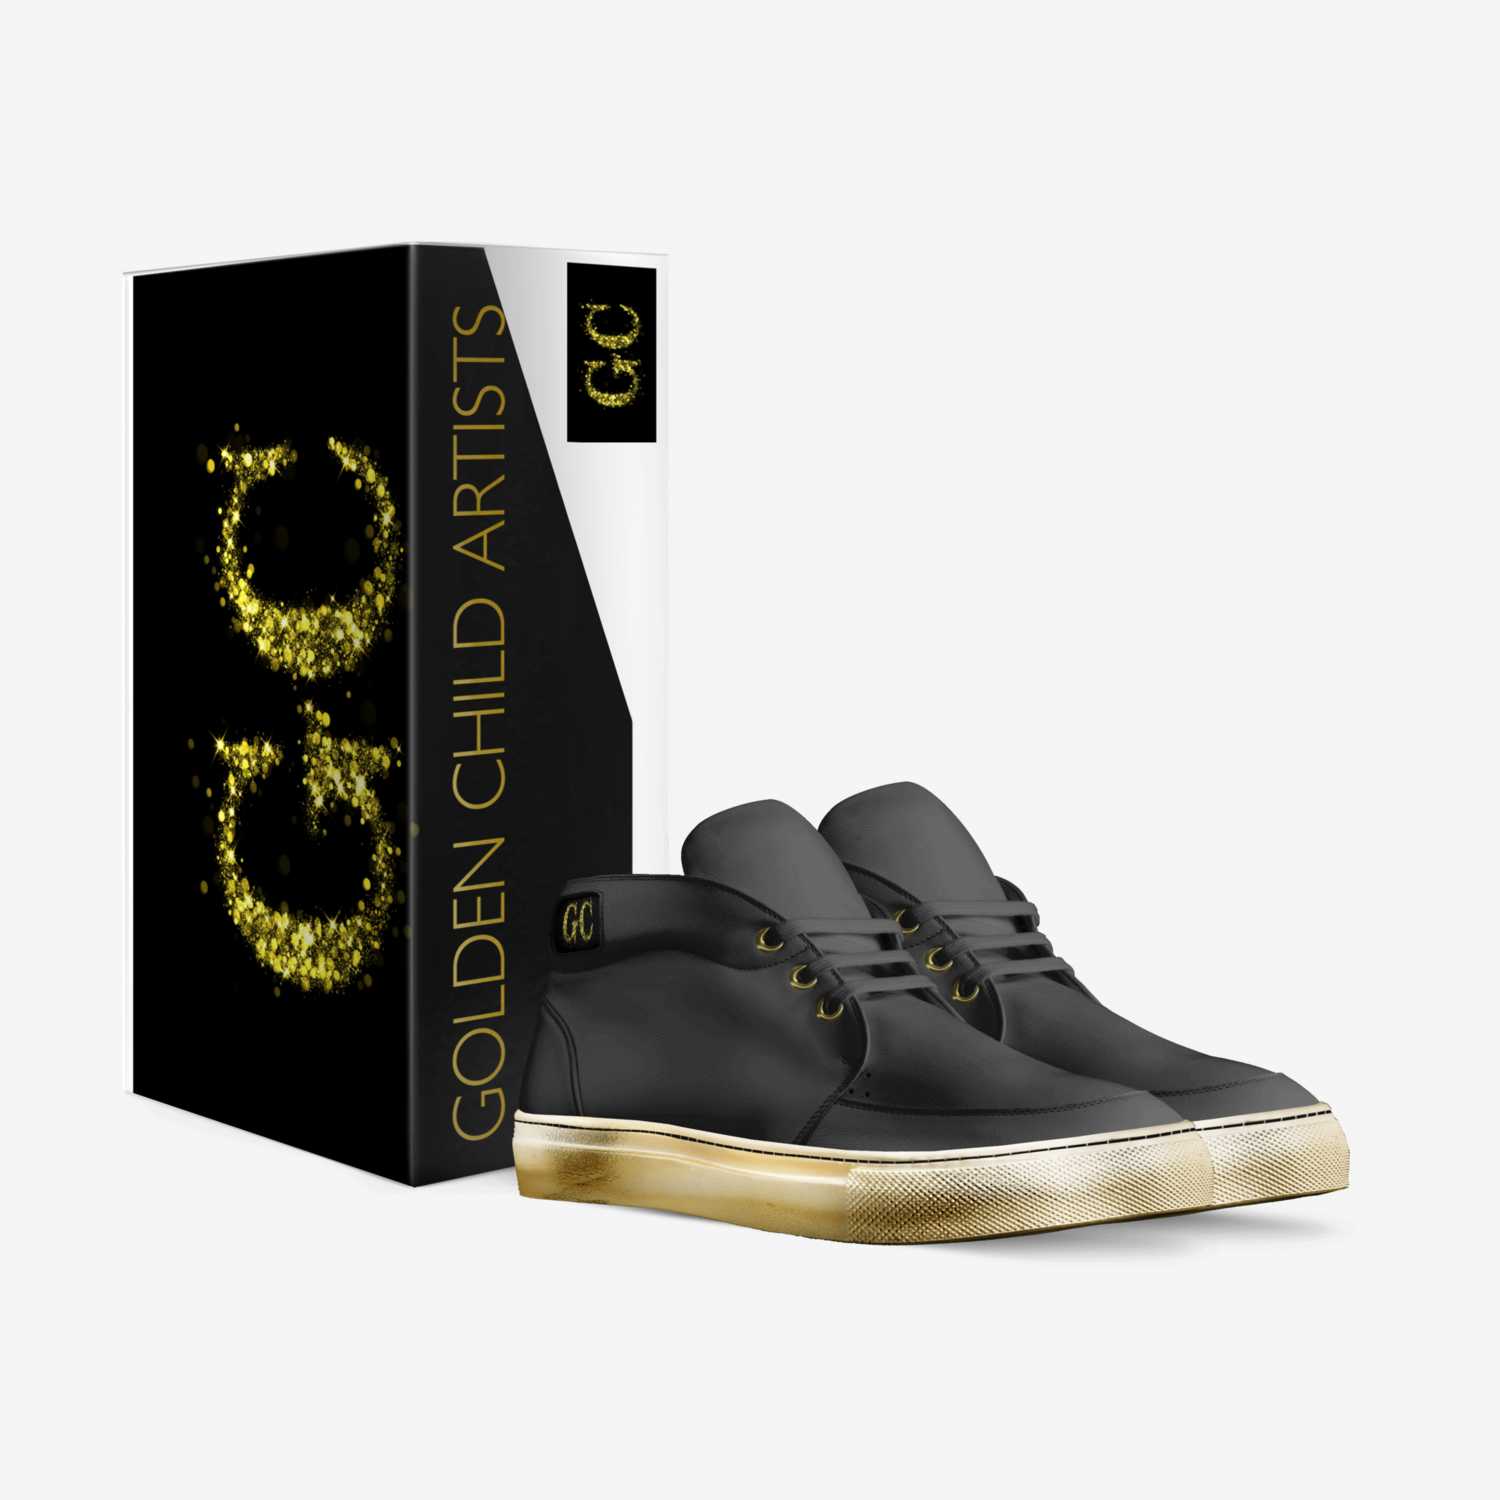 Golden Child custom made in Italy shoes by Bobby Attiko | Box view